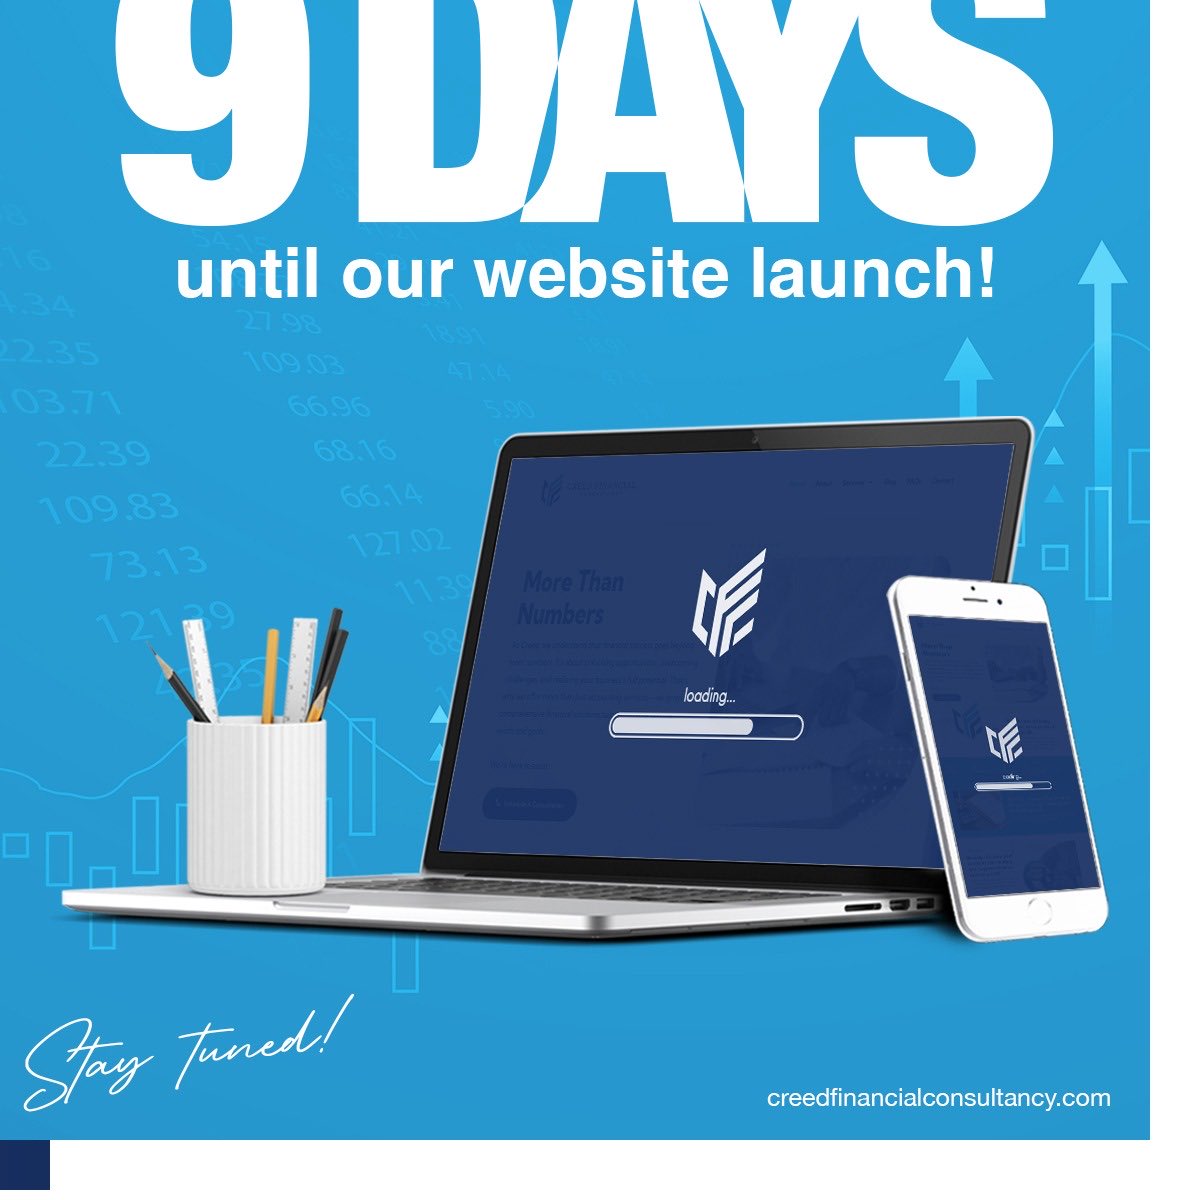 9 days until launch! Welcome to Creed Financial Consultancy Limited, where financial excellence meets innovation. Stay tuned as we gear up to unveil our new website and share how we're empowering businesses like yours to thrive in the financial landscape.

#FinancialExcellence